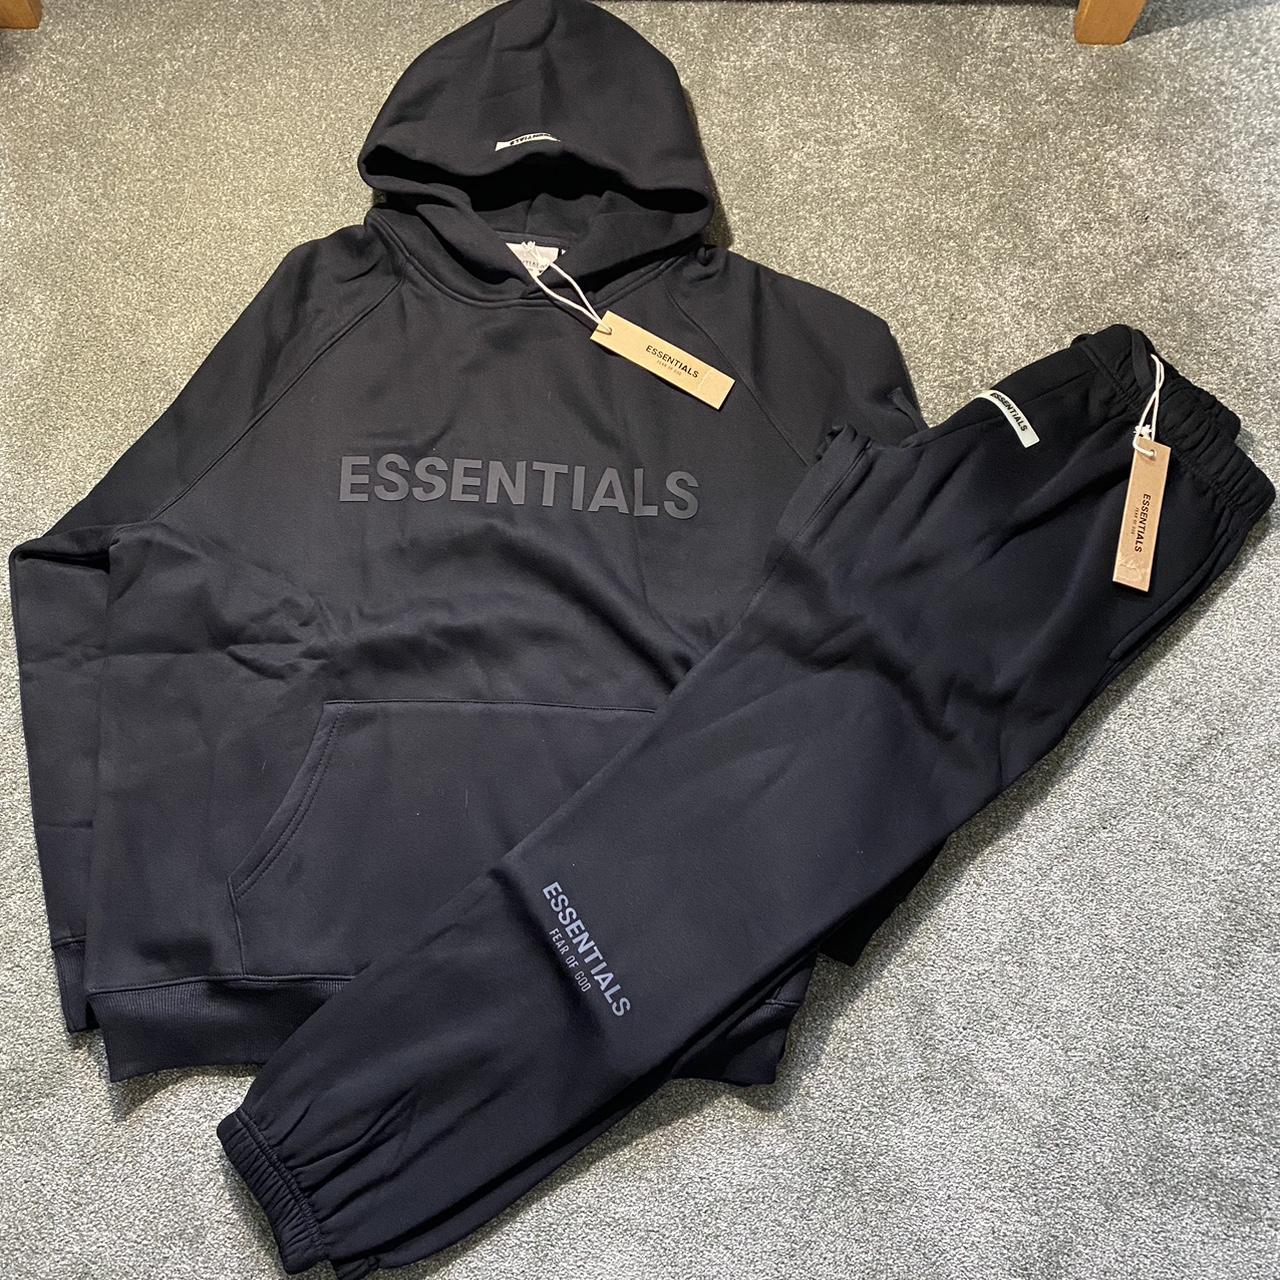 essentials tracksuit size medium very warm and cosy - Depop